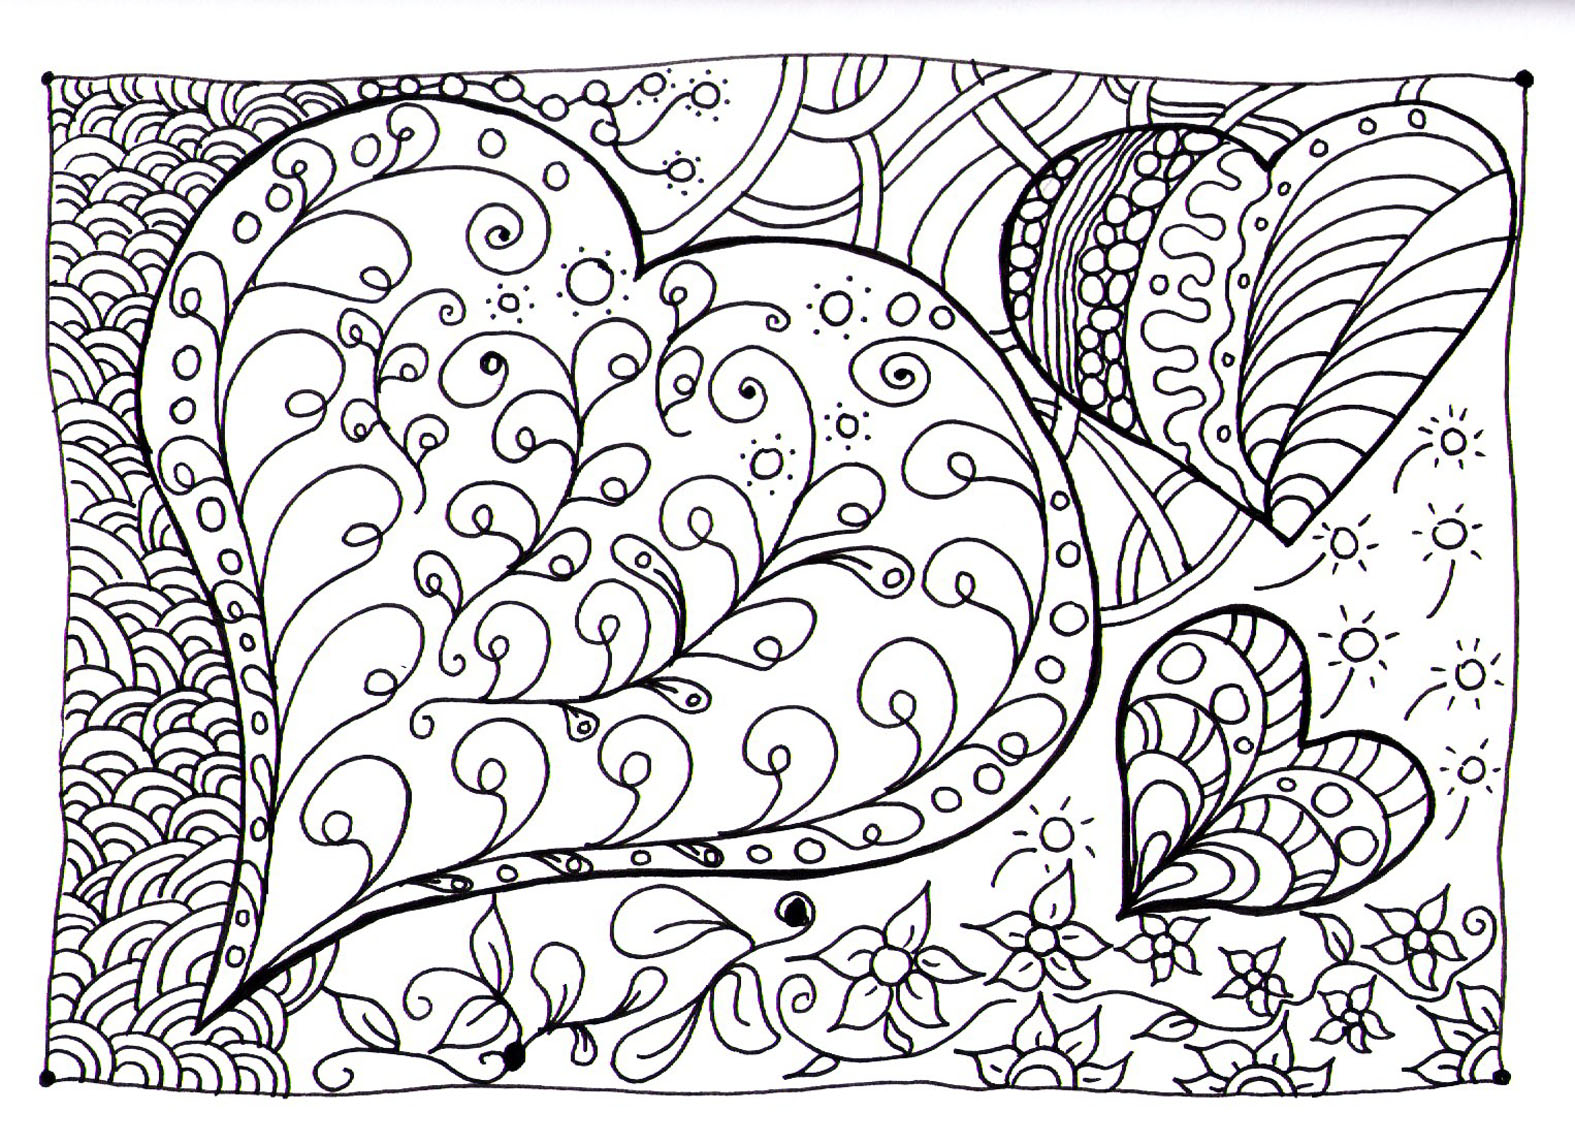 heart-zen-anti-stress-adult-coloring-pages